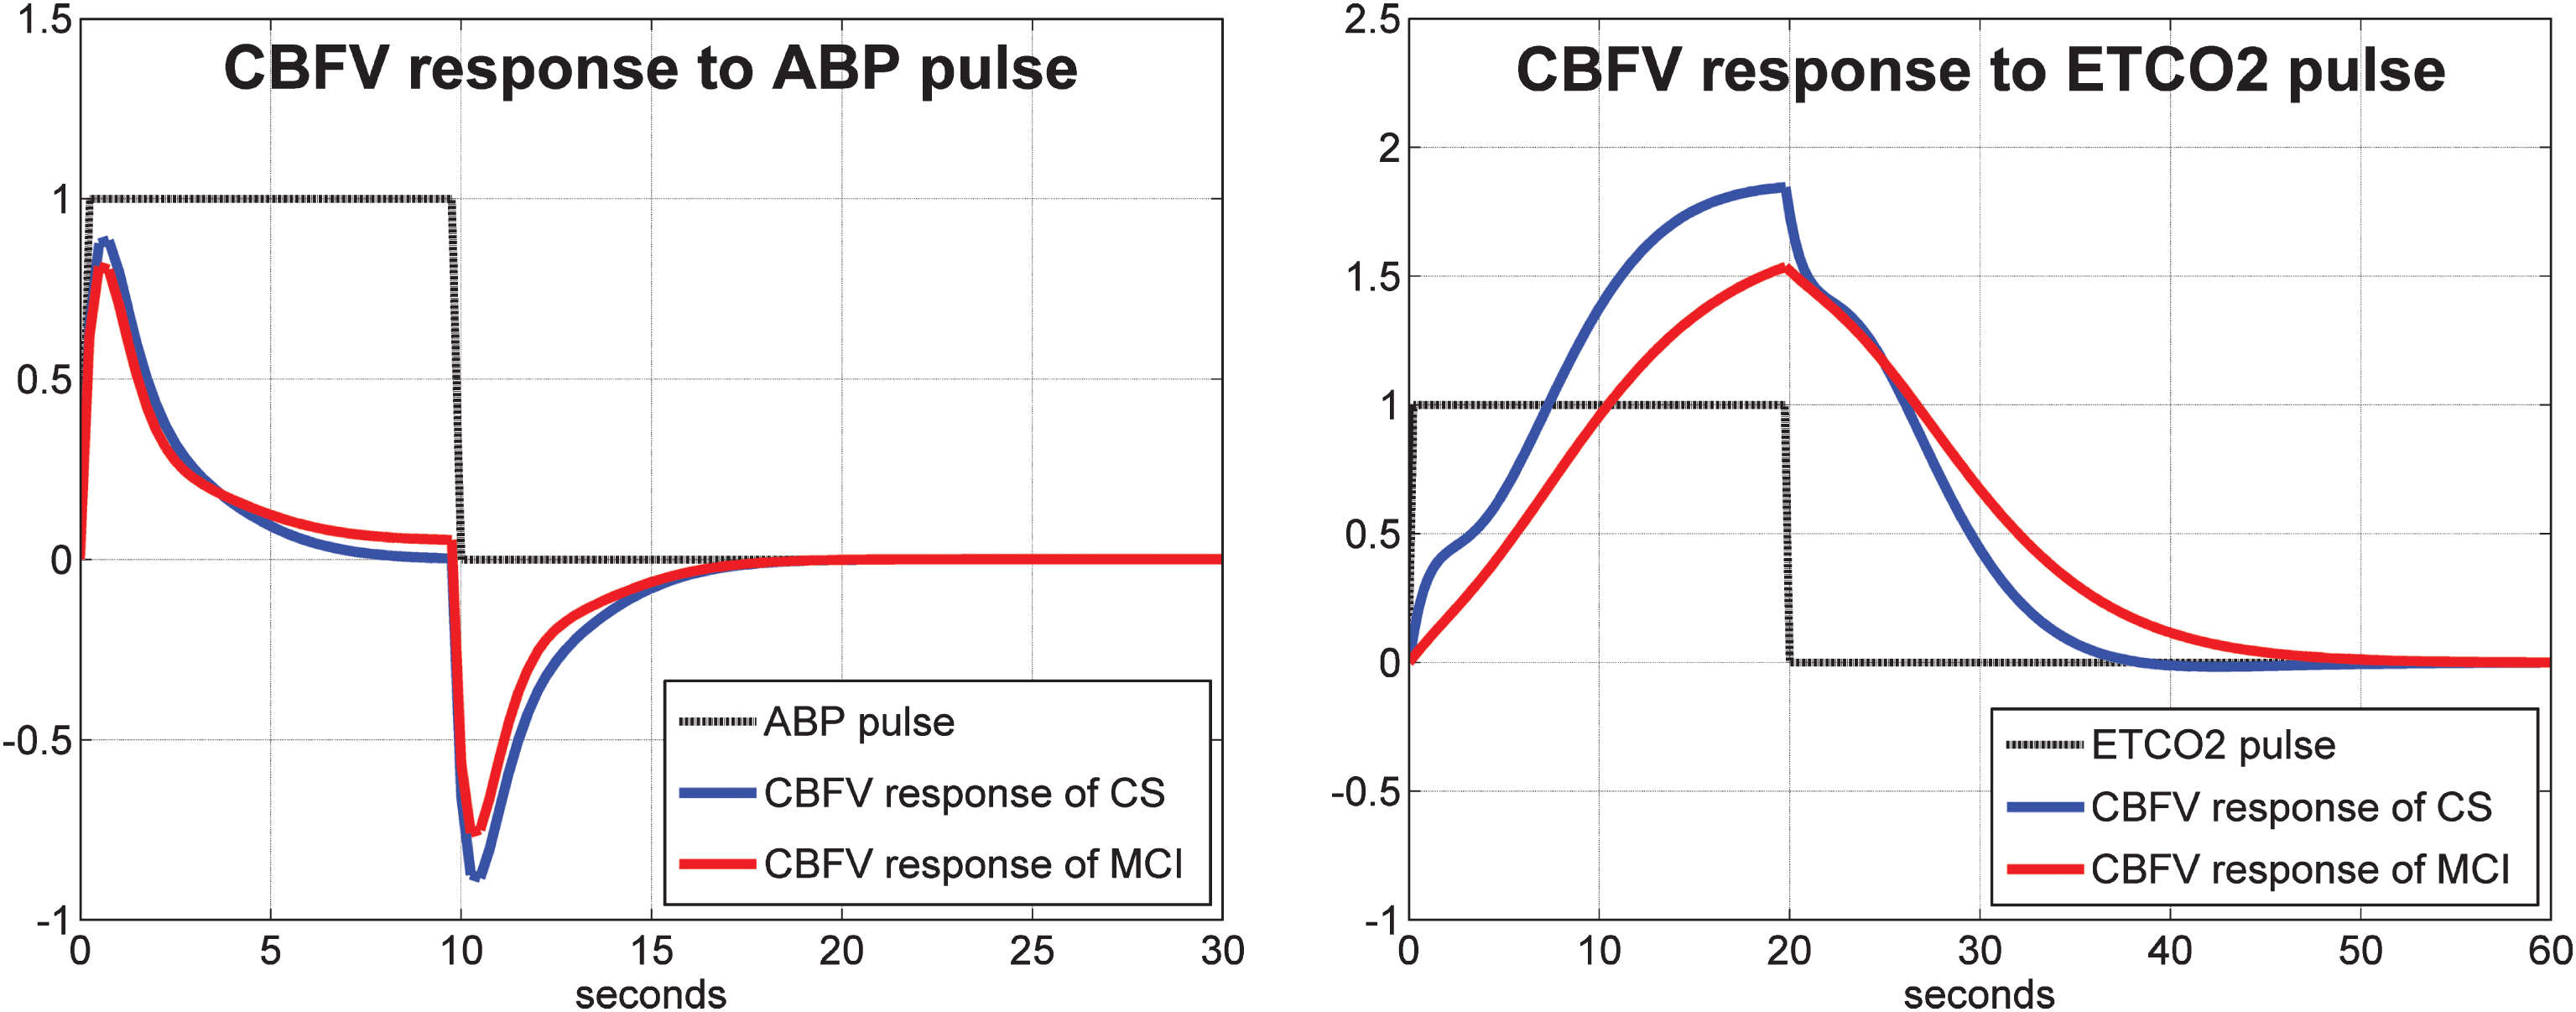 Average model-predicted CBFV/TCD responses for all control subjects (blue line) and for all MCI patients (red line) to a unit pulse change (dotted line) of the ABP input (left panel) and of the ETCO2 input (right panel), while the other input is kept at baseline.